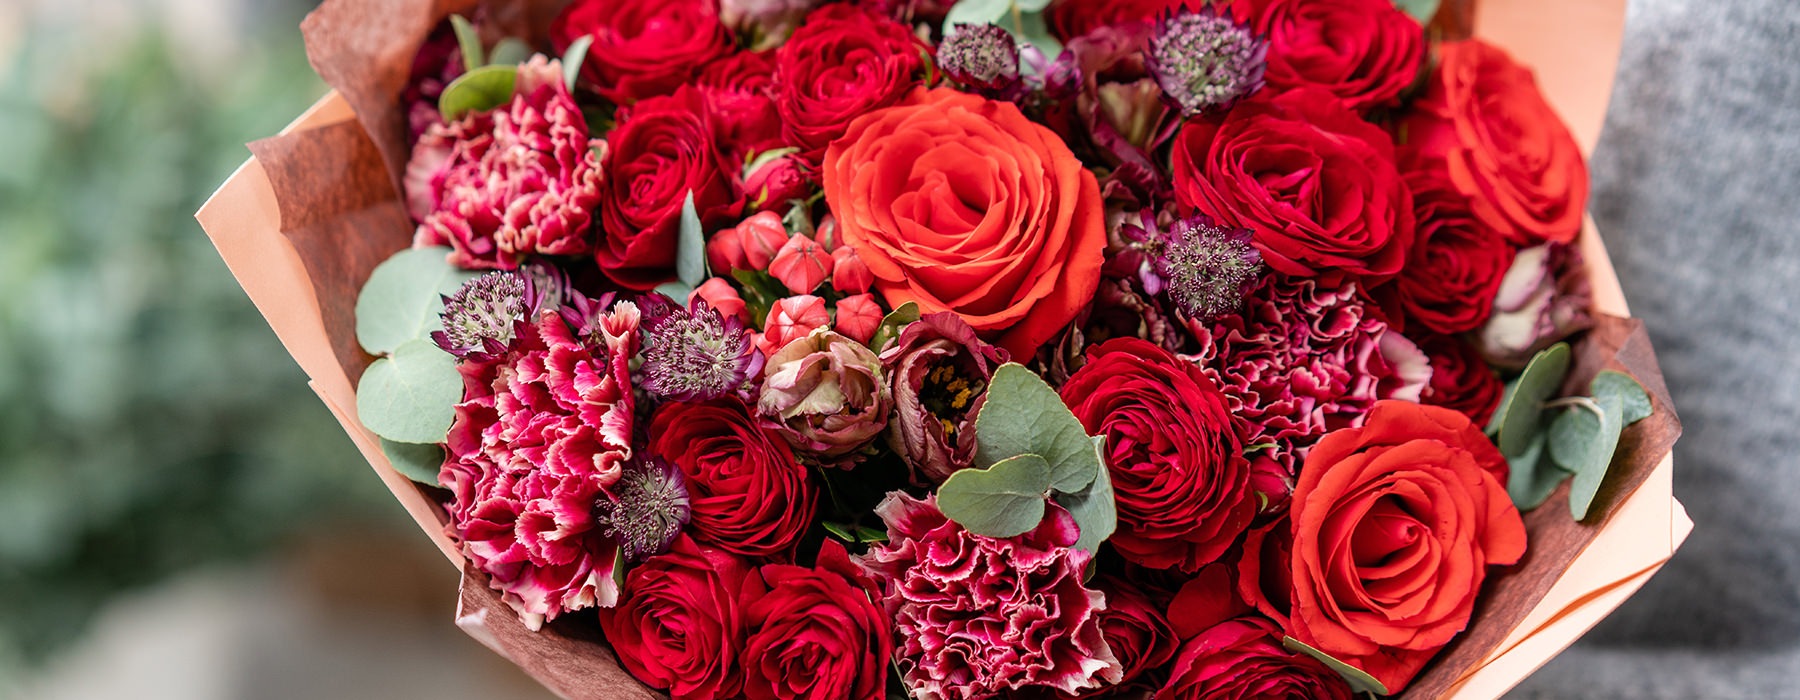 Bright red bouquet of roses 